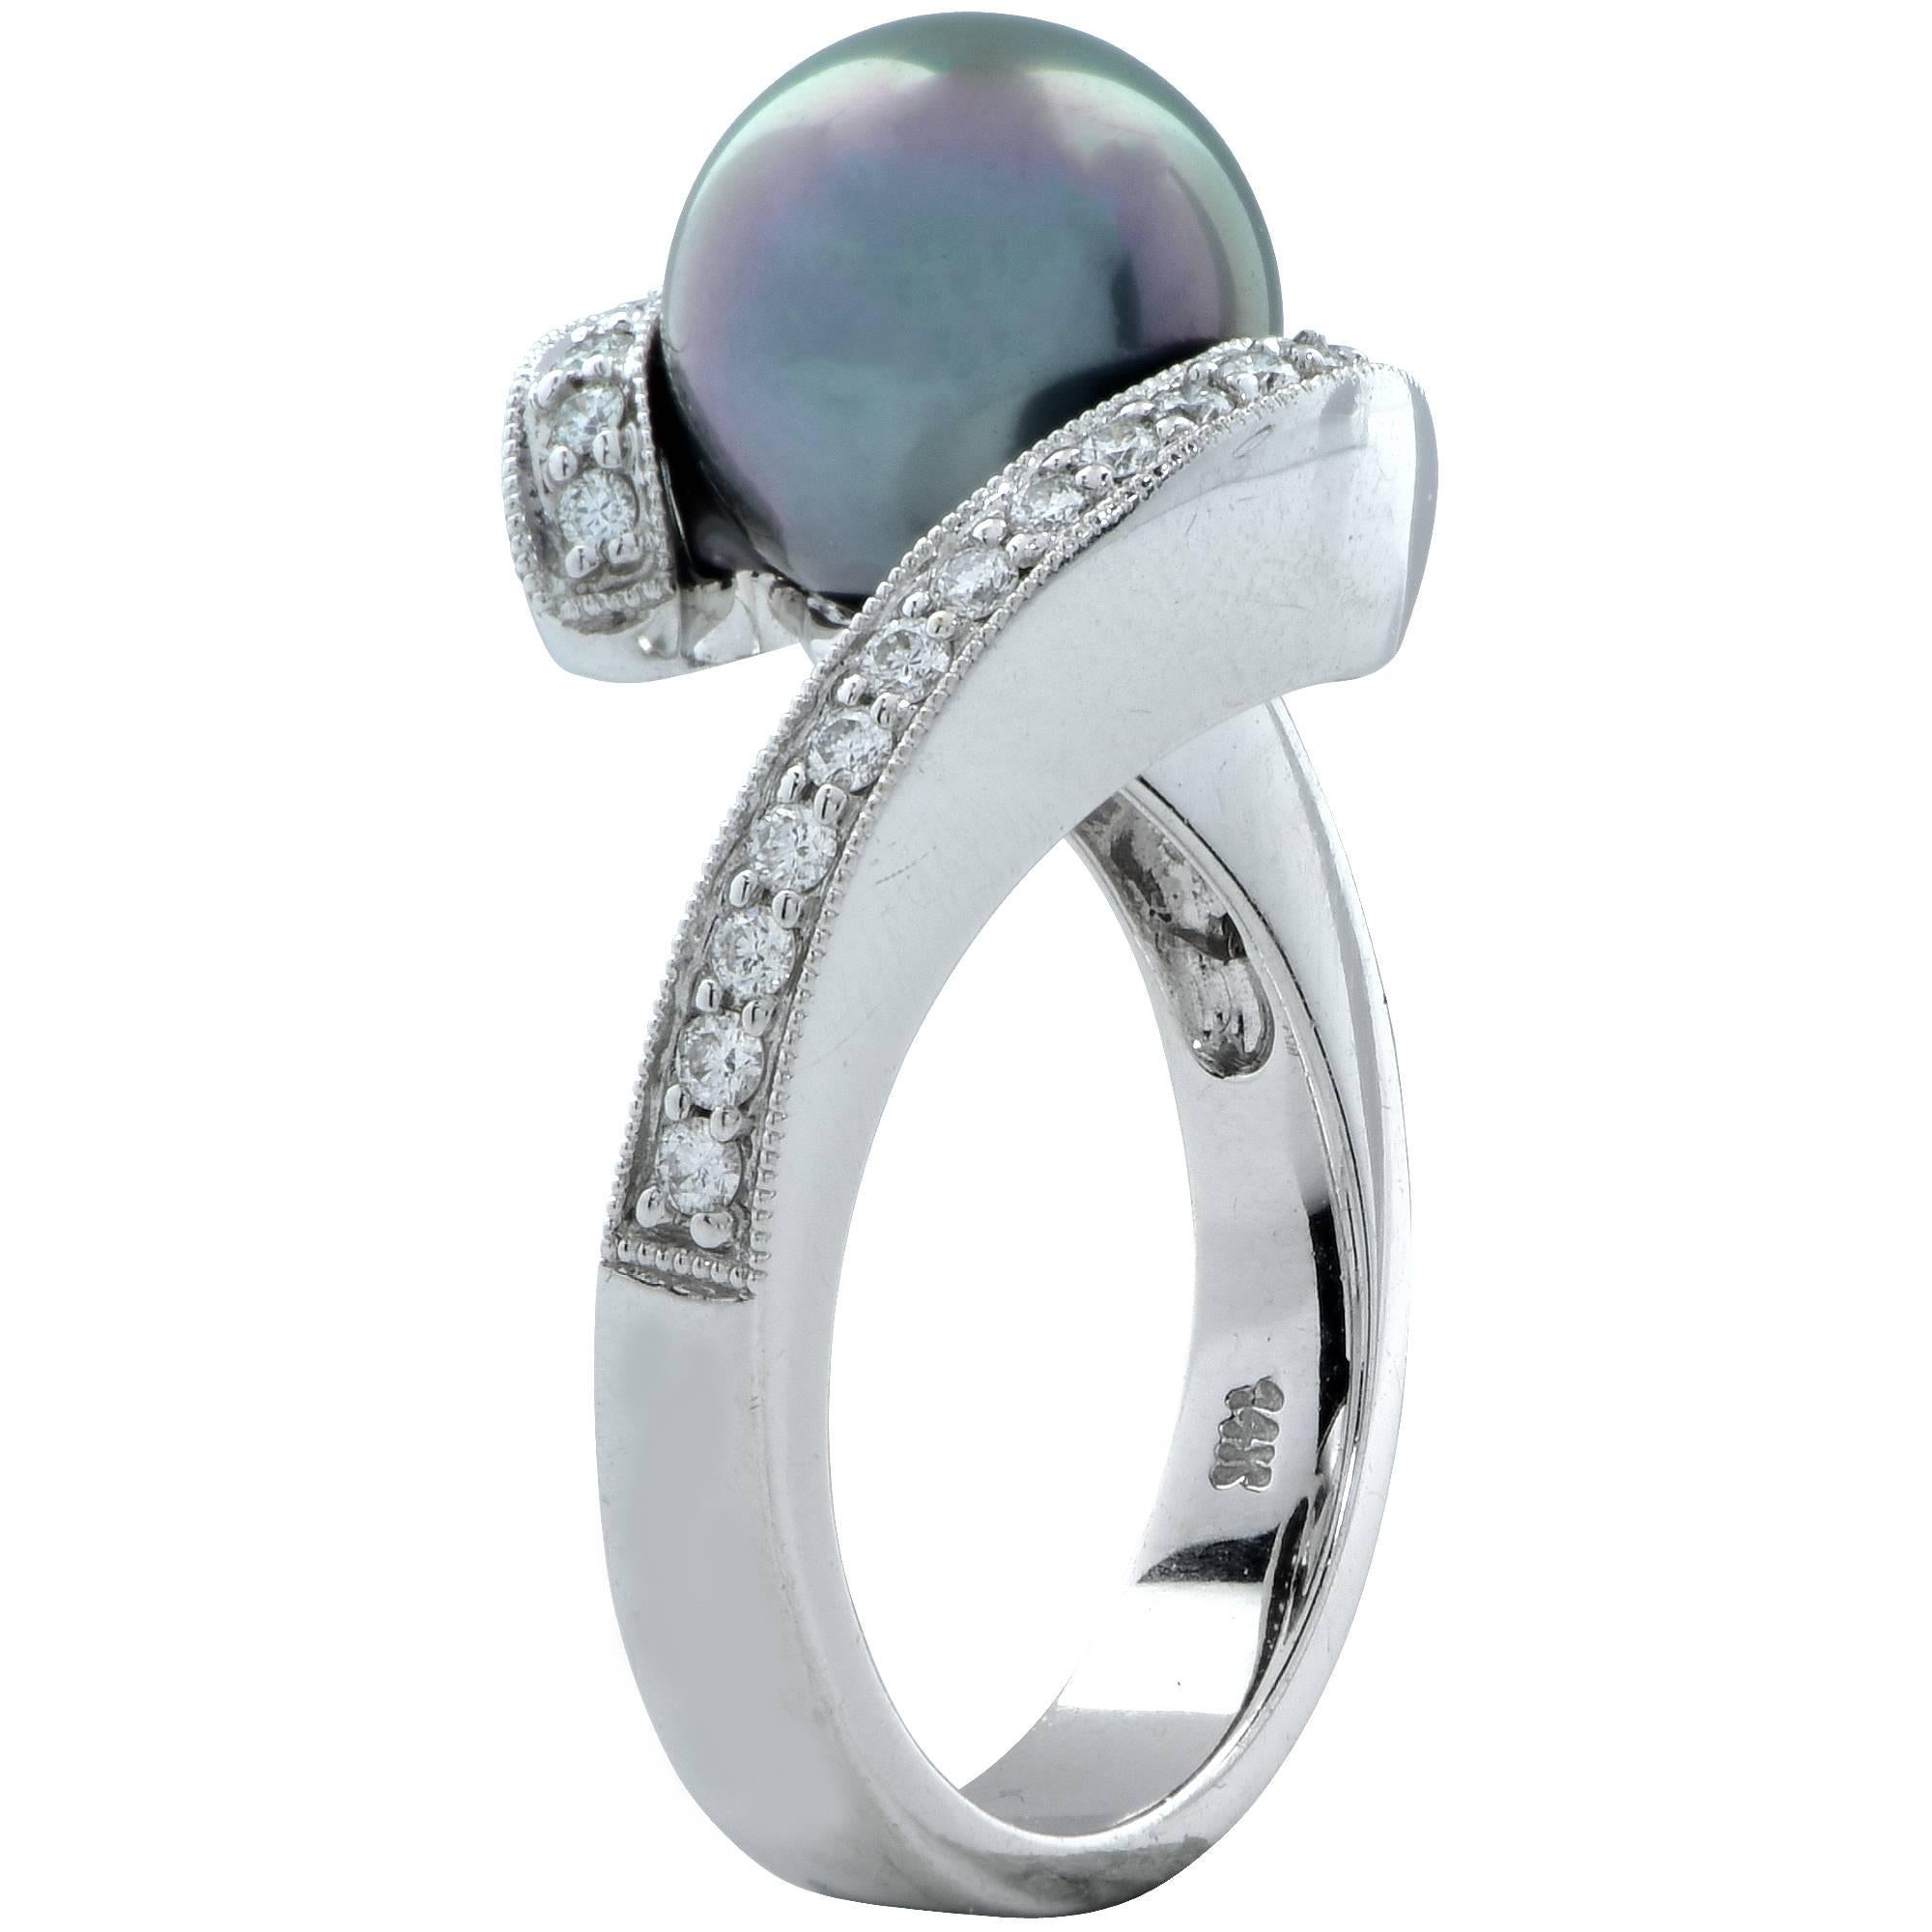 14k white gold ring featuring a 9.4mm Tahitian pearl and accented by 30 round brilliant cut diamonds weighing approximately .30cts.

The ring is a size 7 and can be sized up or down.
Measurements are available upon request.
It is stamped and/or